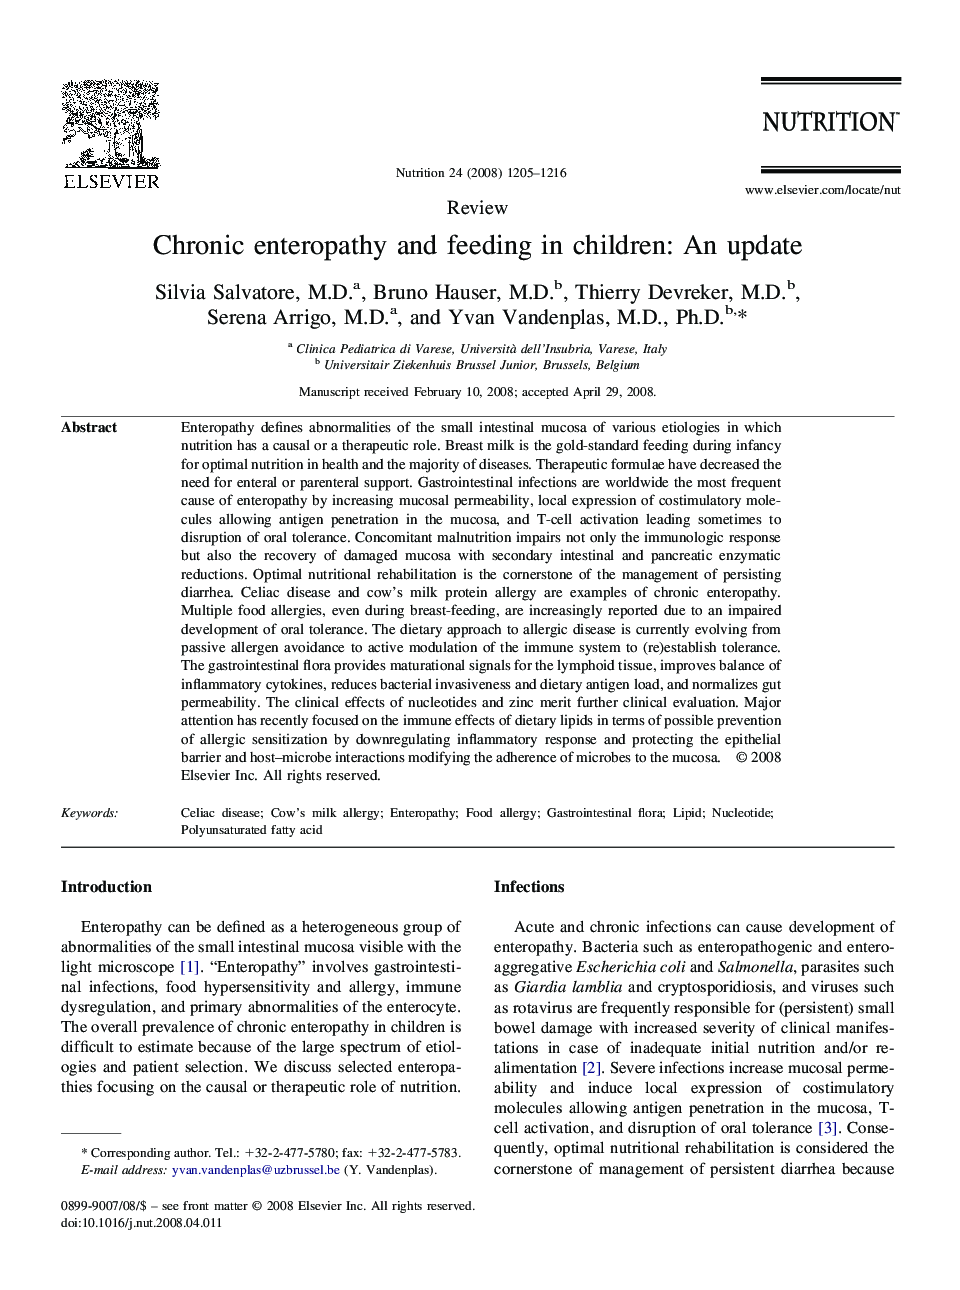 Chronic enteropathy and feeding in children: An update